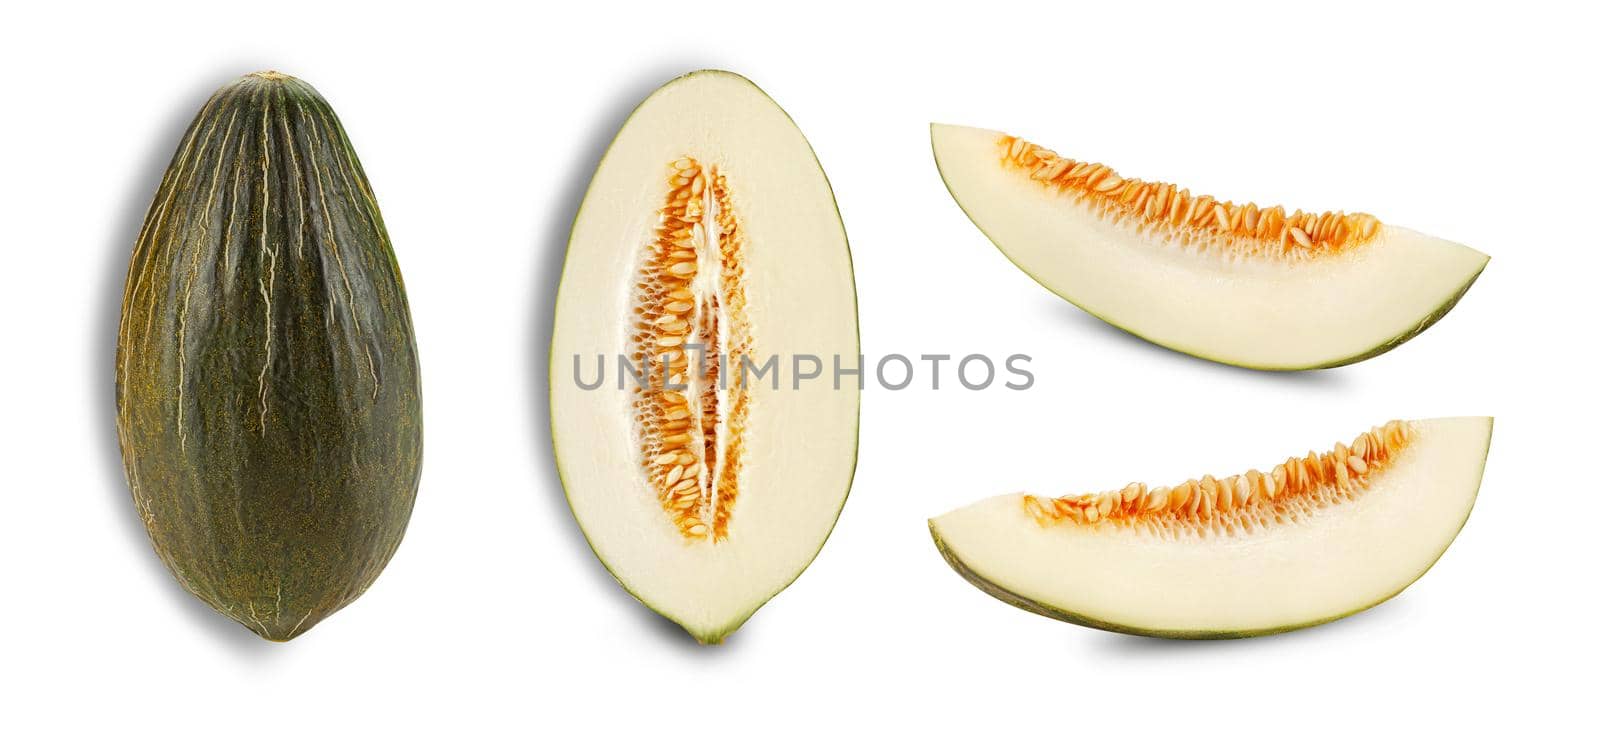 Palatable green tendral melon, one half and two slices in a cross-section, isolated on white background with copy space for text or images. Mellow pulp with seeds. Pumpkin plant family. Side view. Close-up shot.